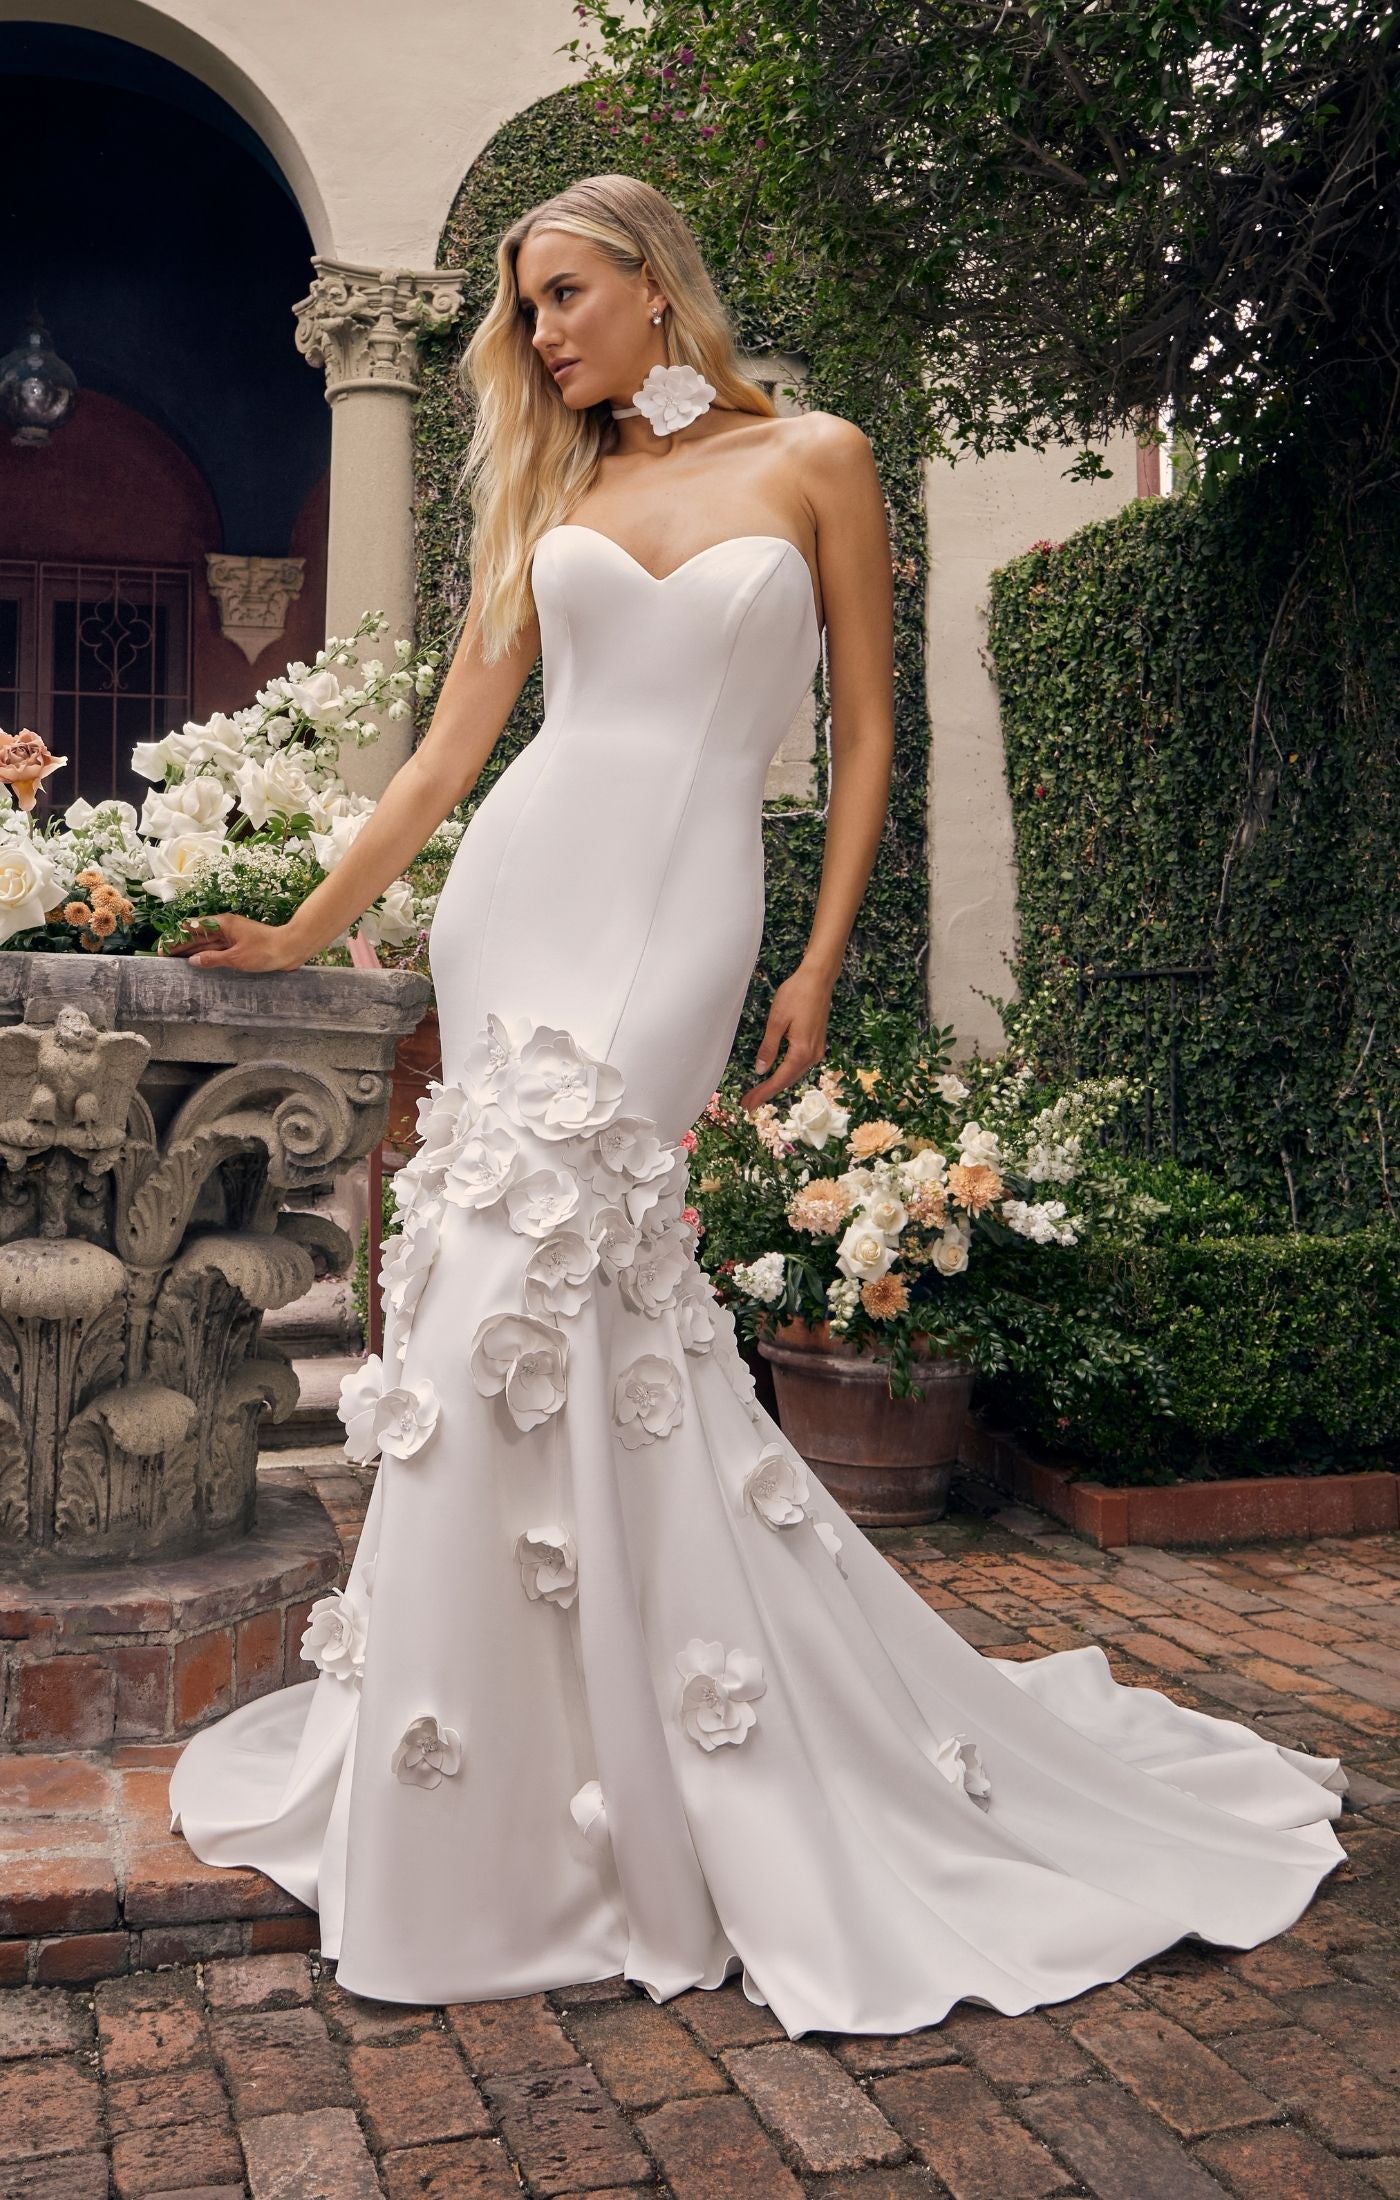 Strapless Sweetheart Neckline A-line Wedding Dress With Detachable Sleeves  And Floral Details